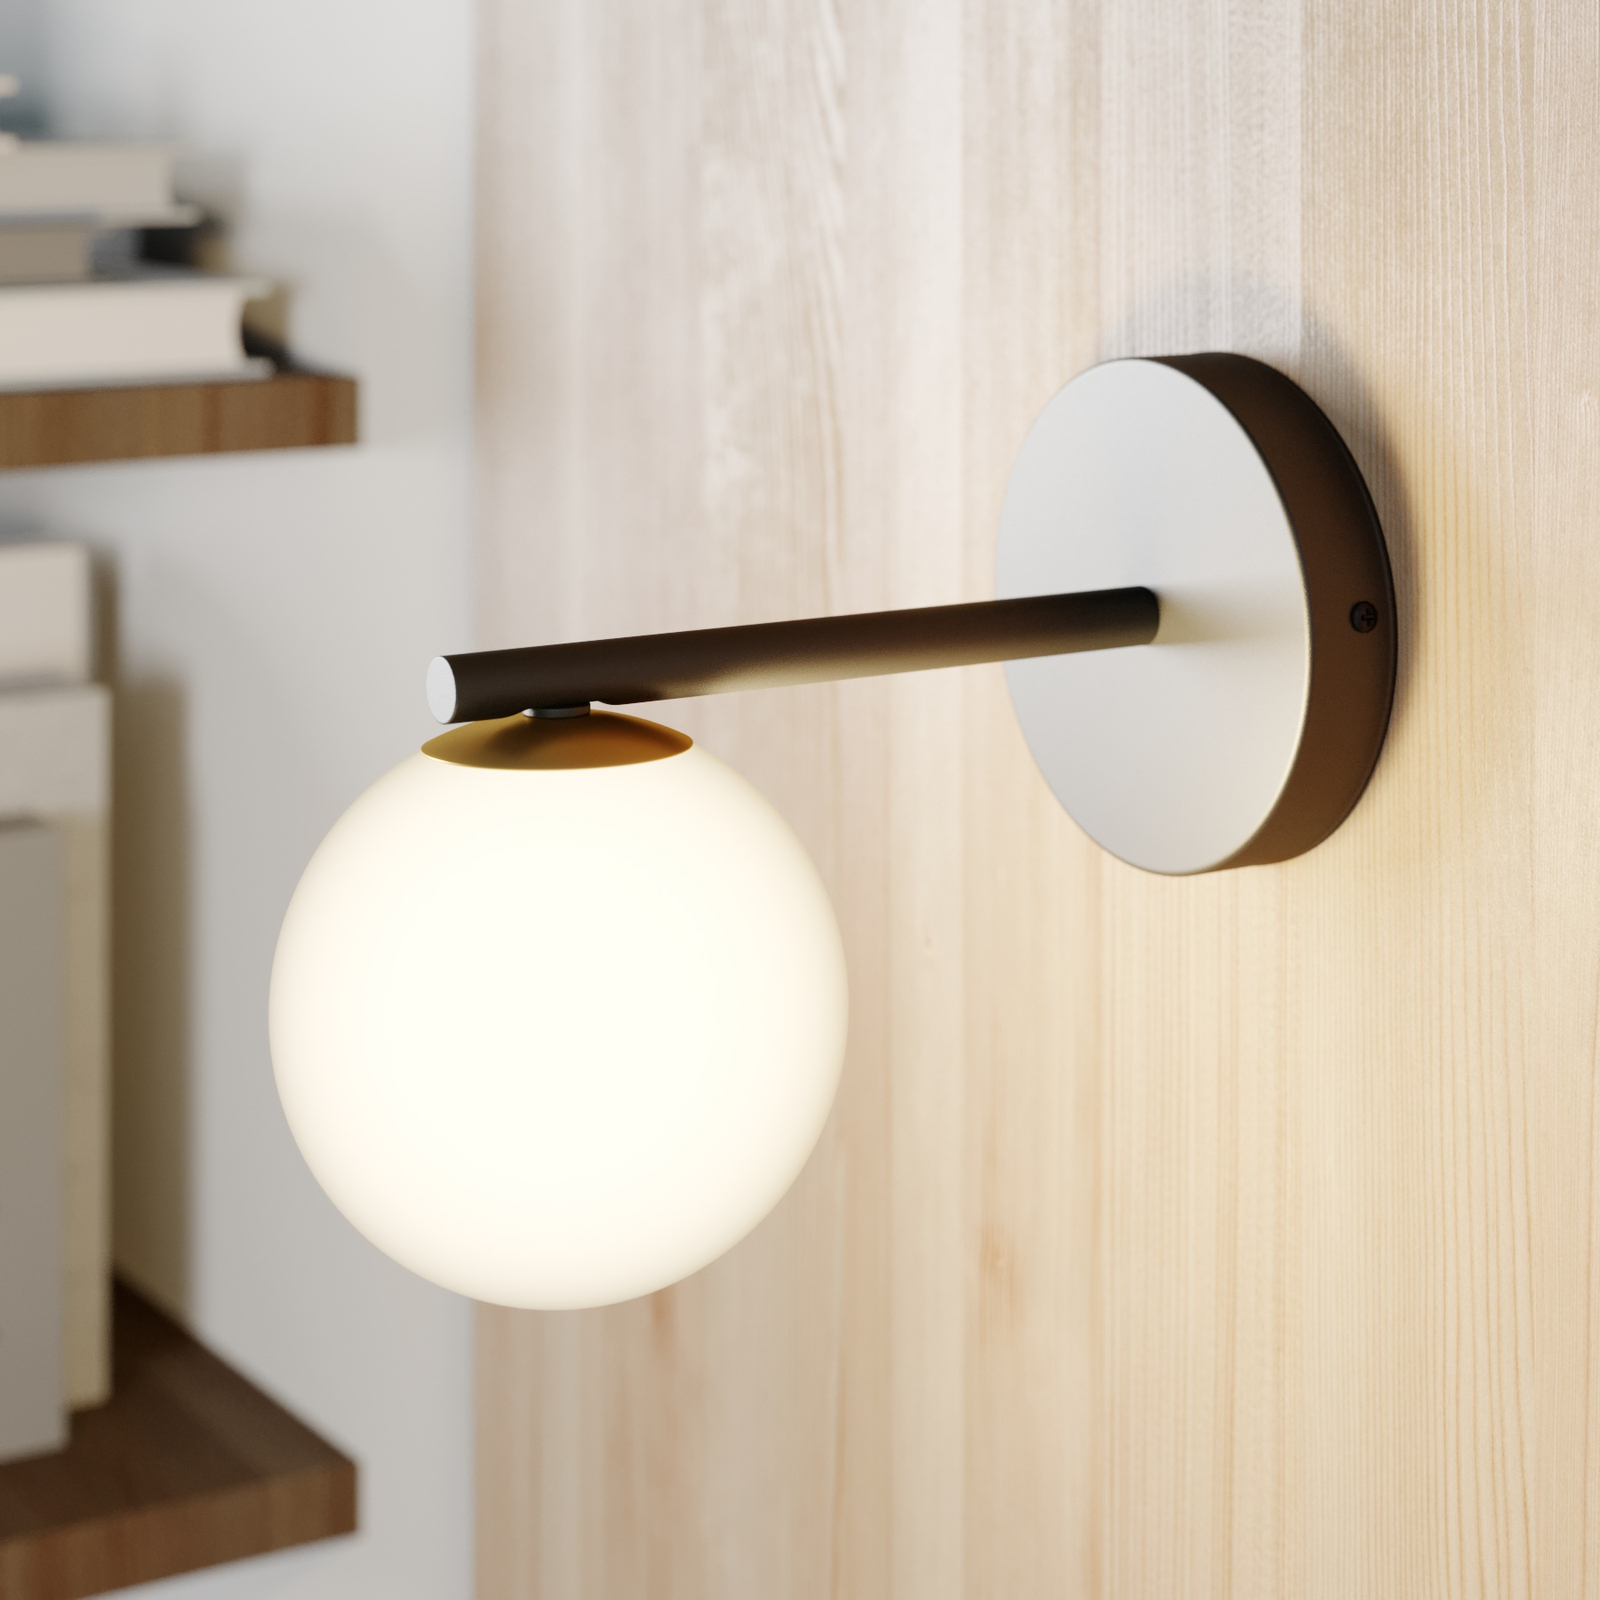 Gama wall light in black with a glass globe